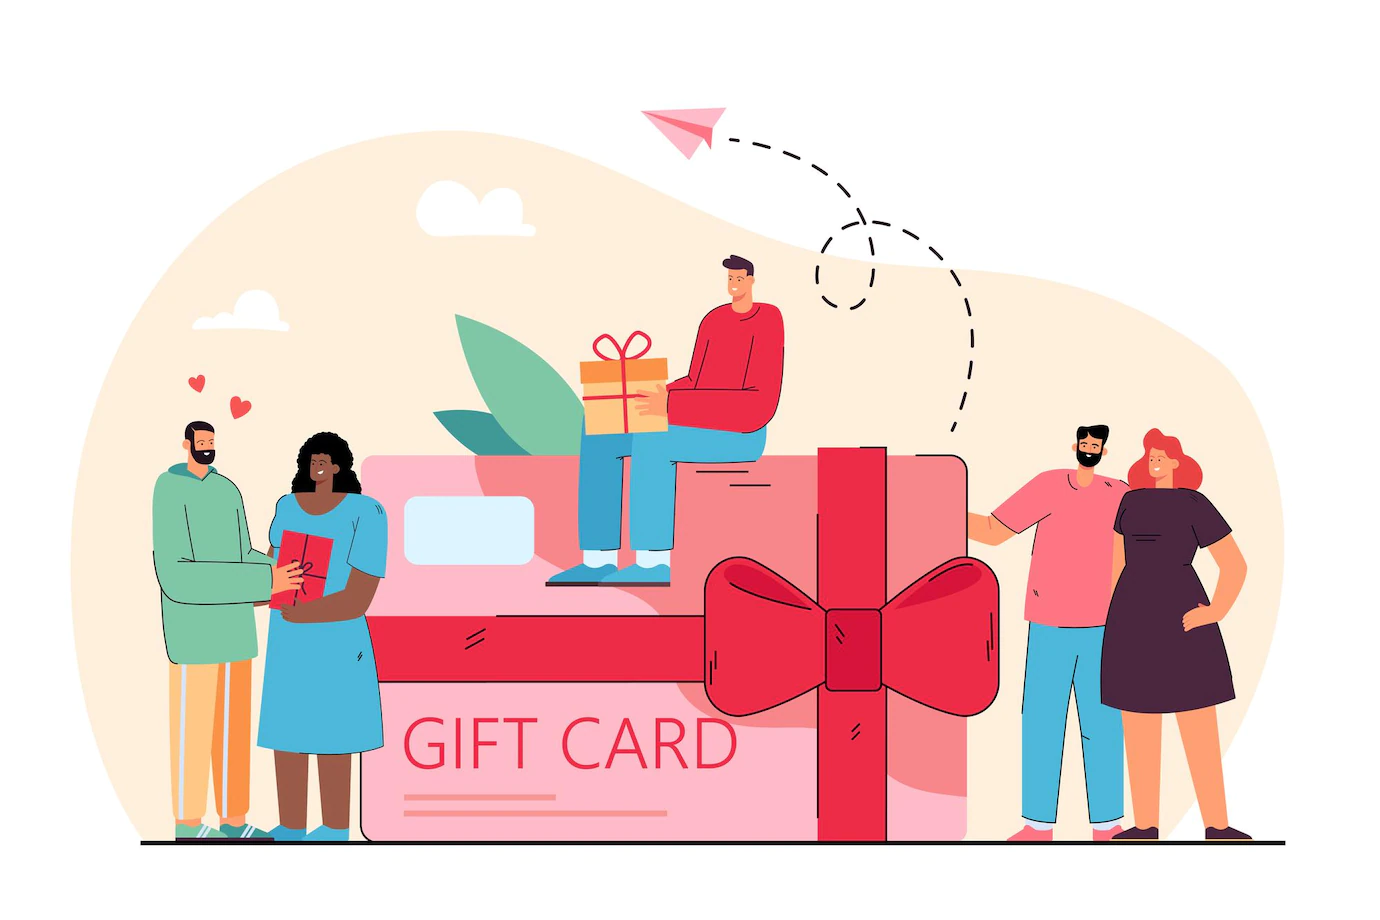 Corporate Gift Cards program